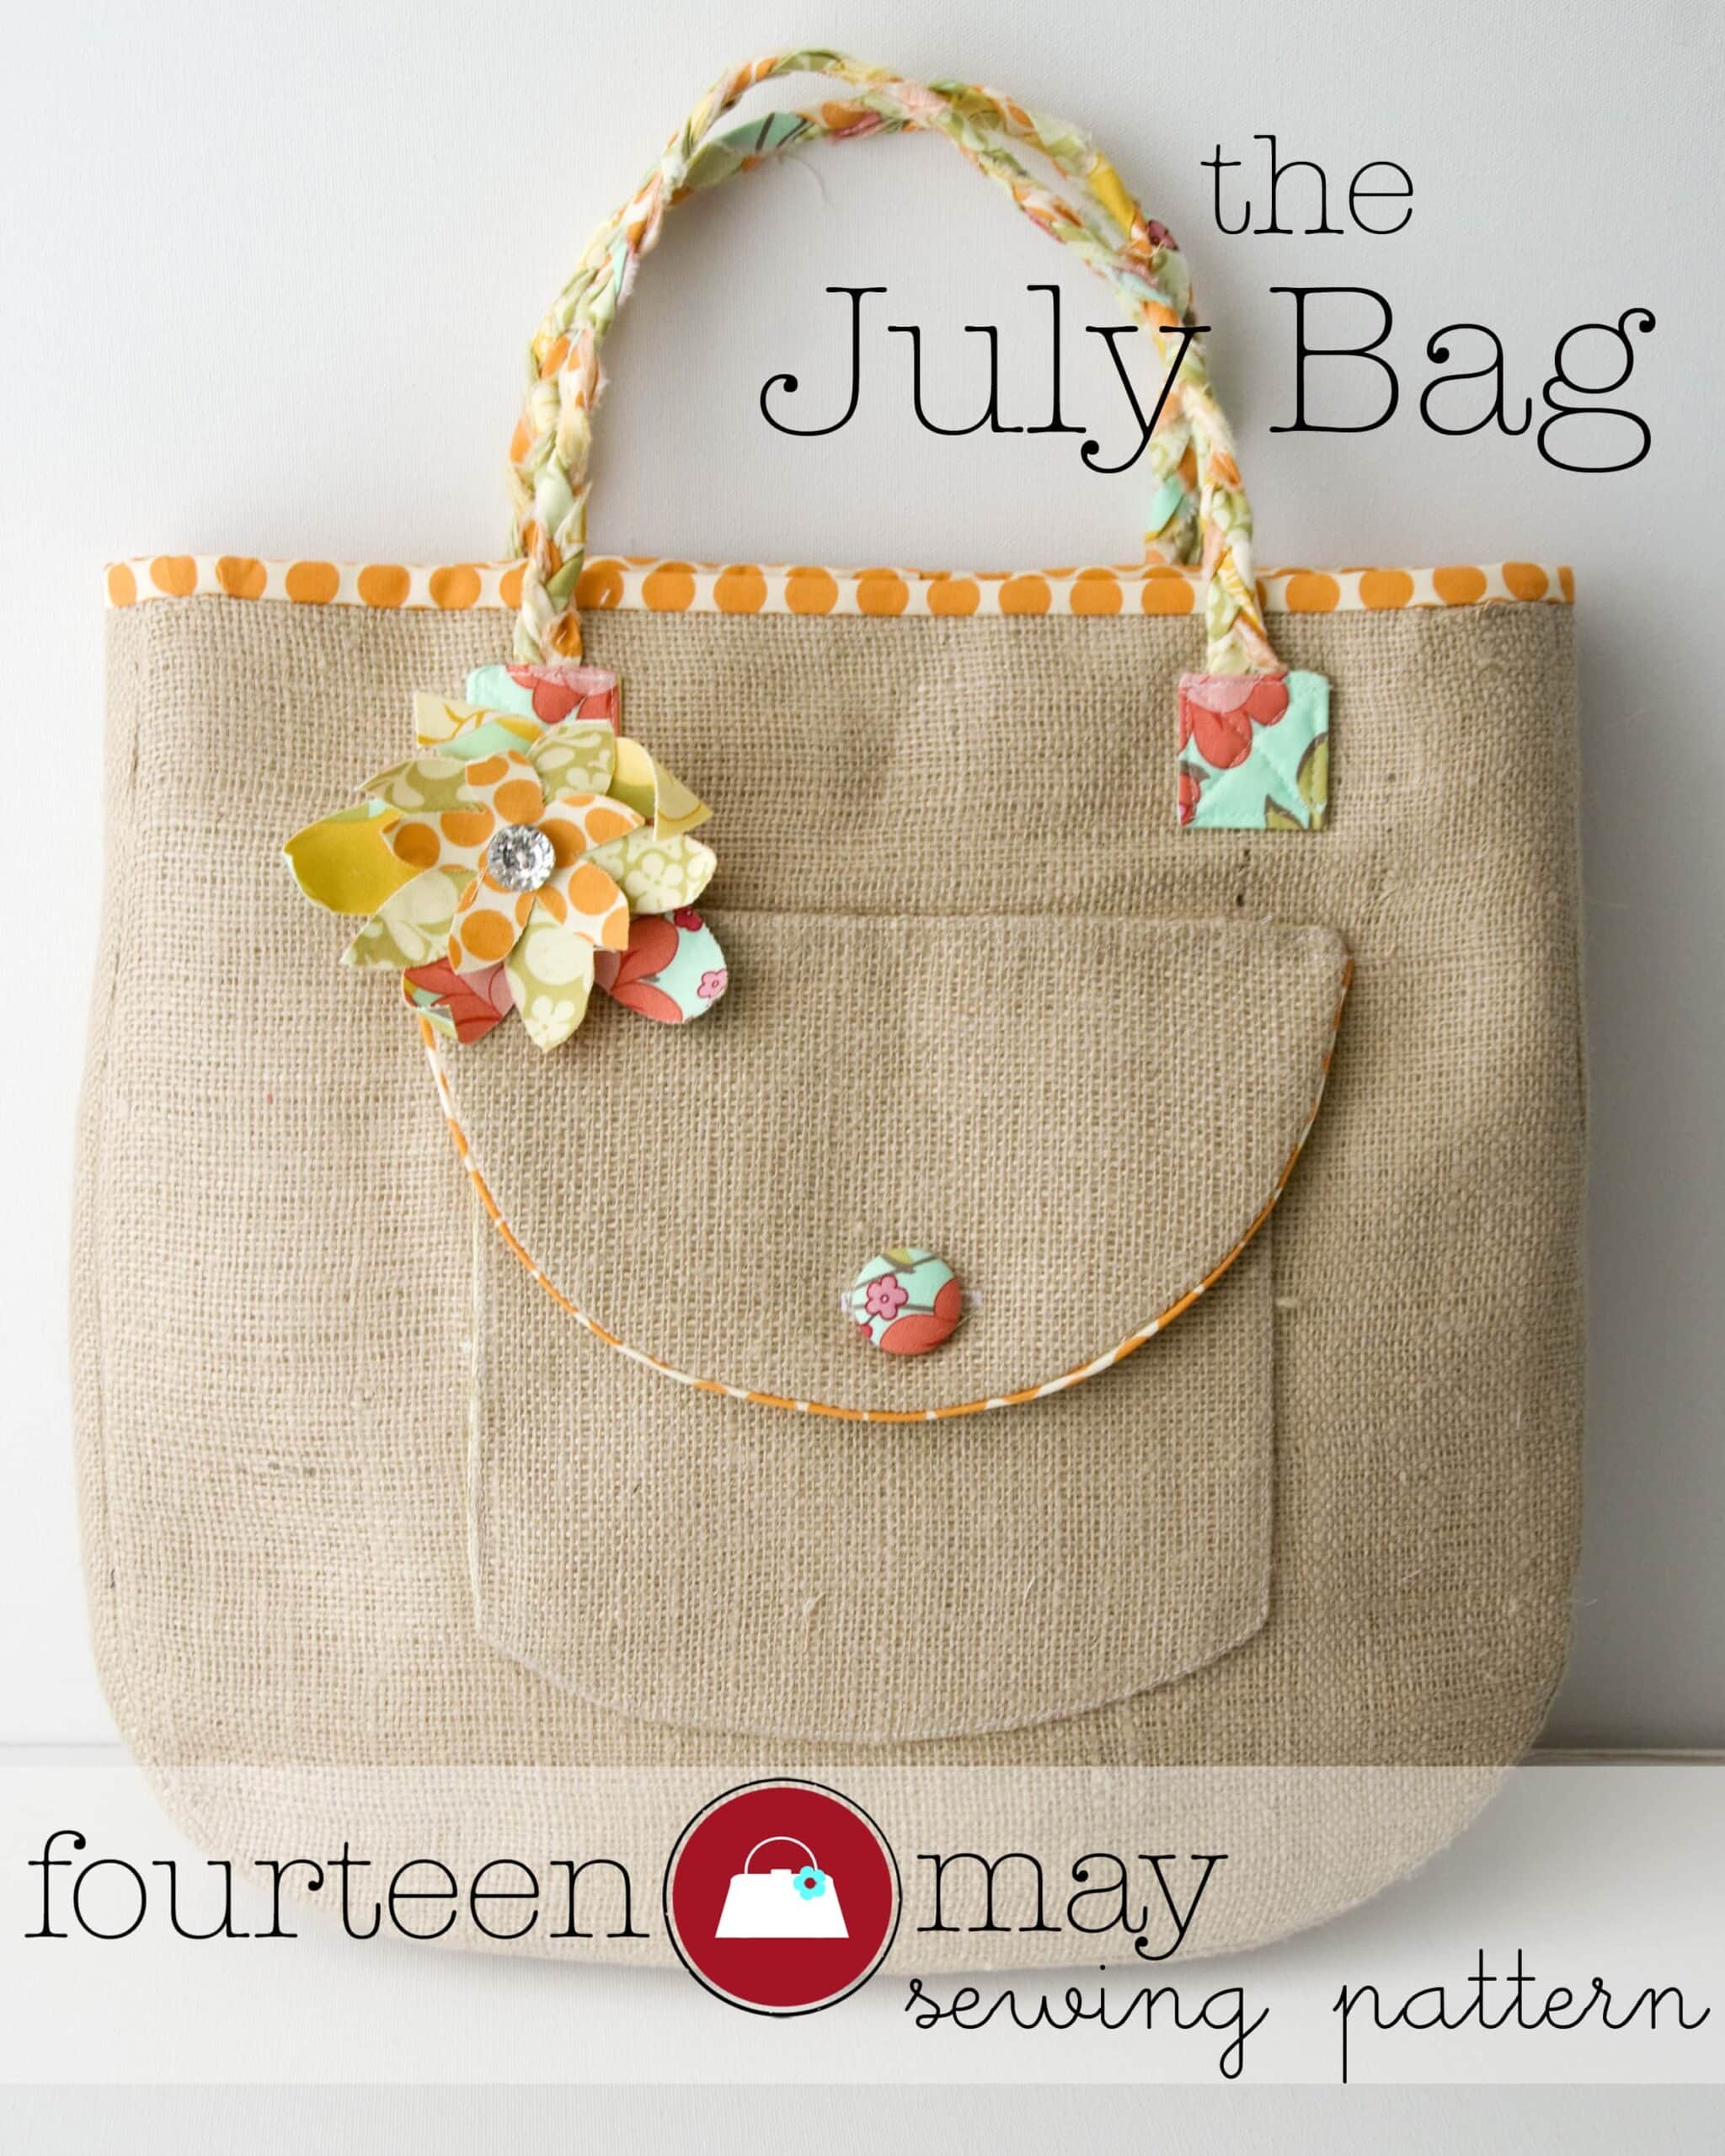 Introducing the July Bag! Plus…Fabric Flower tutorial